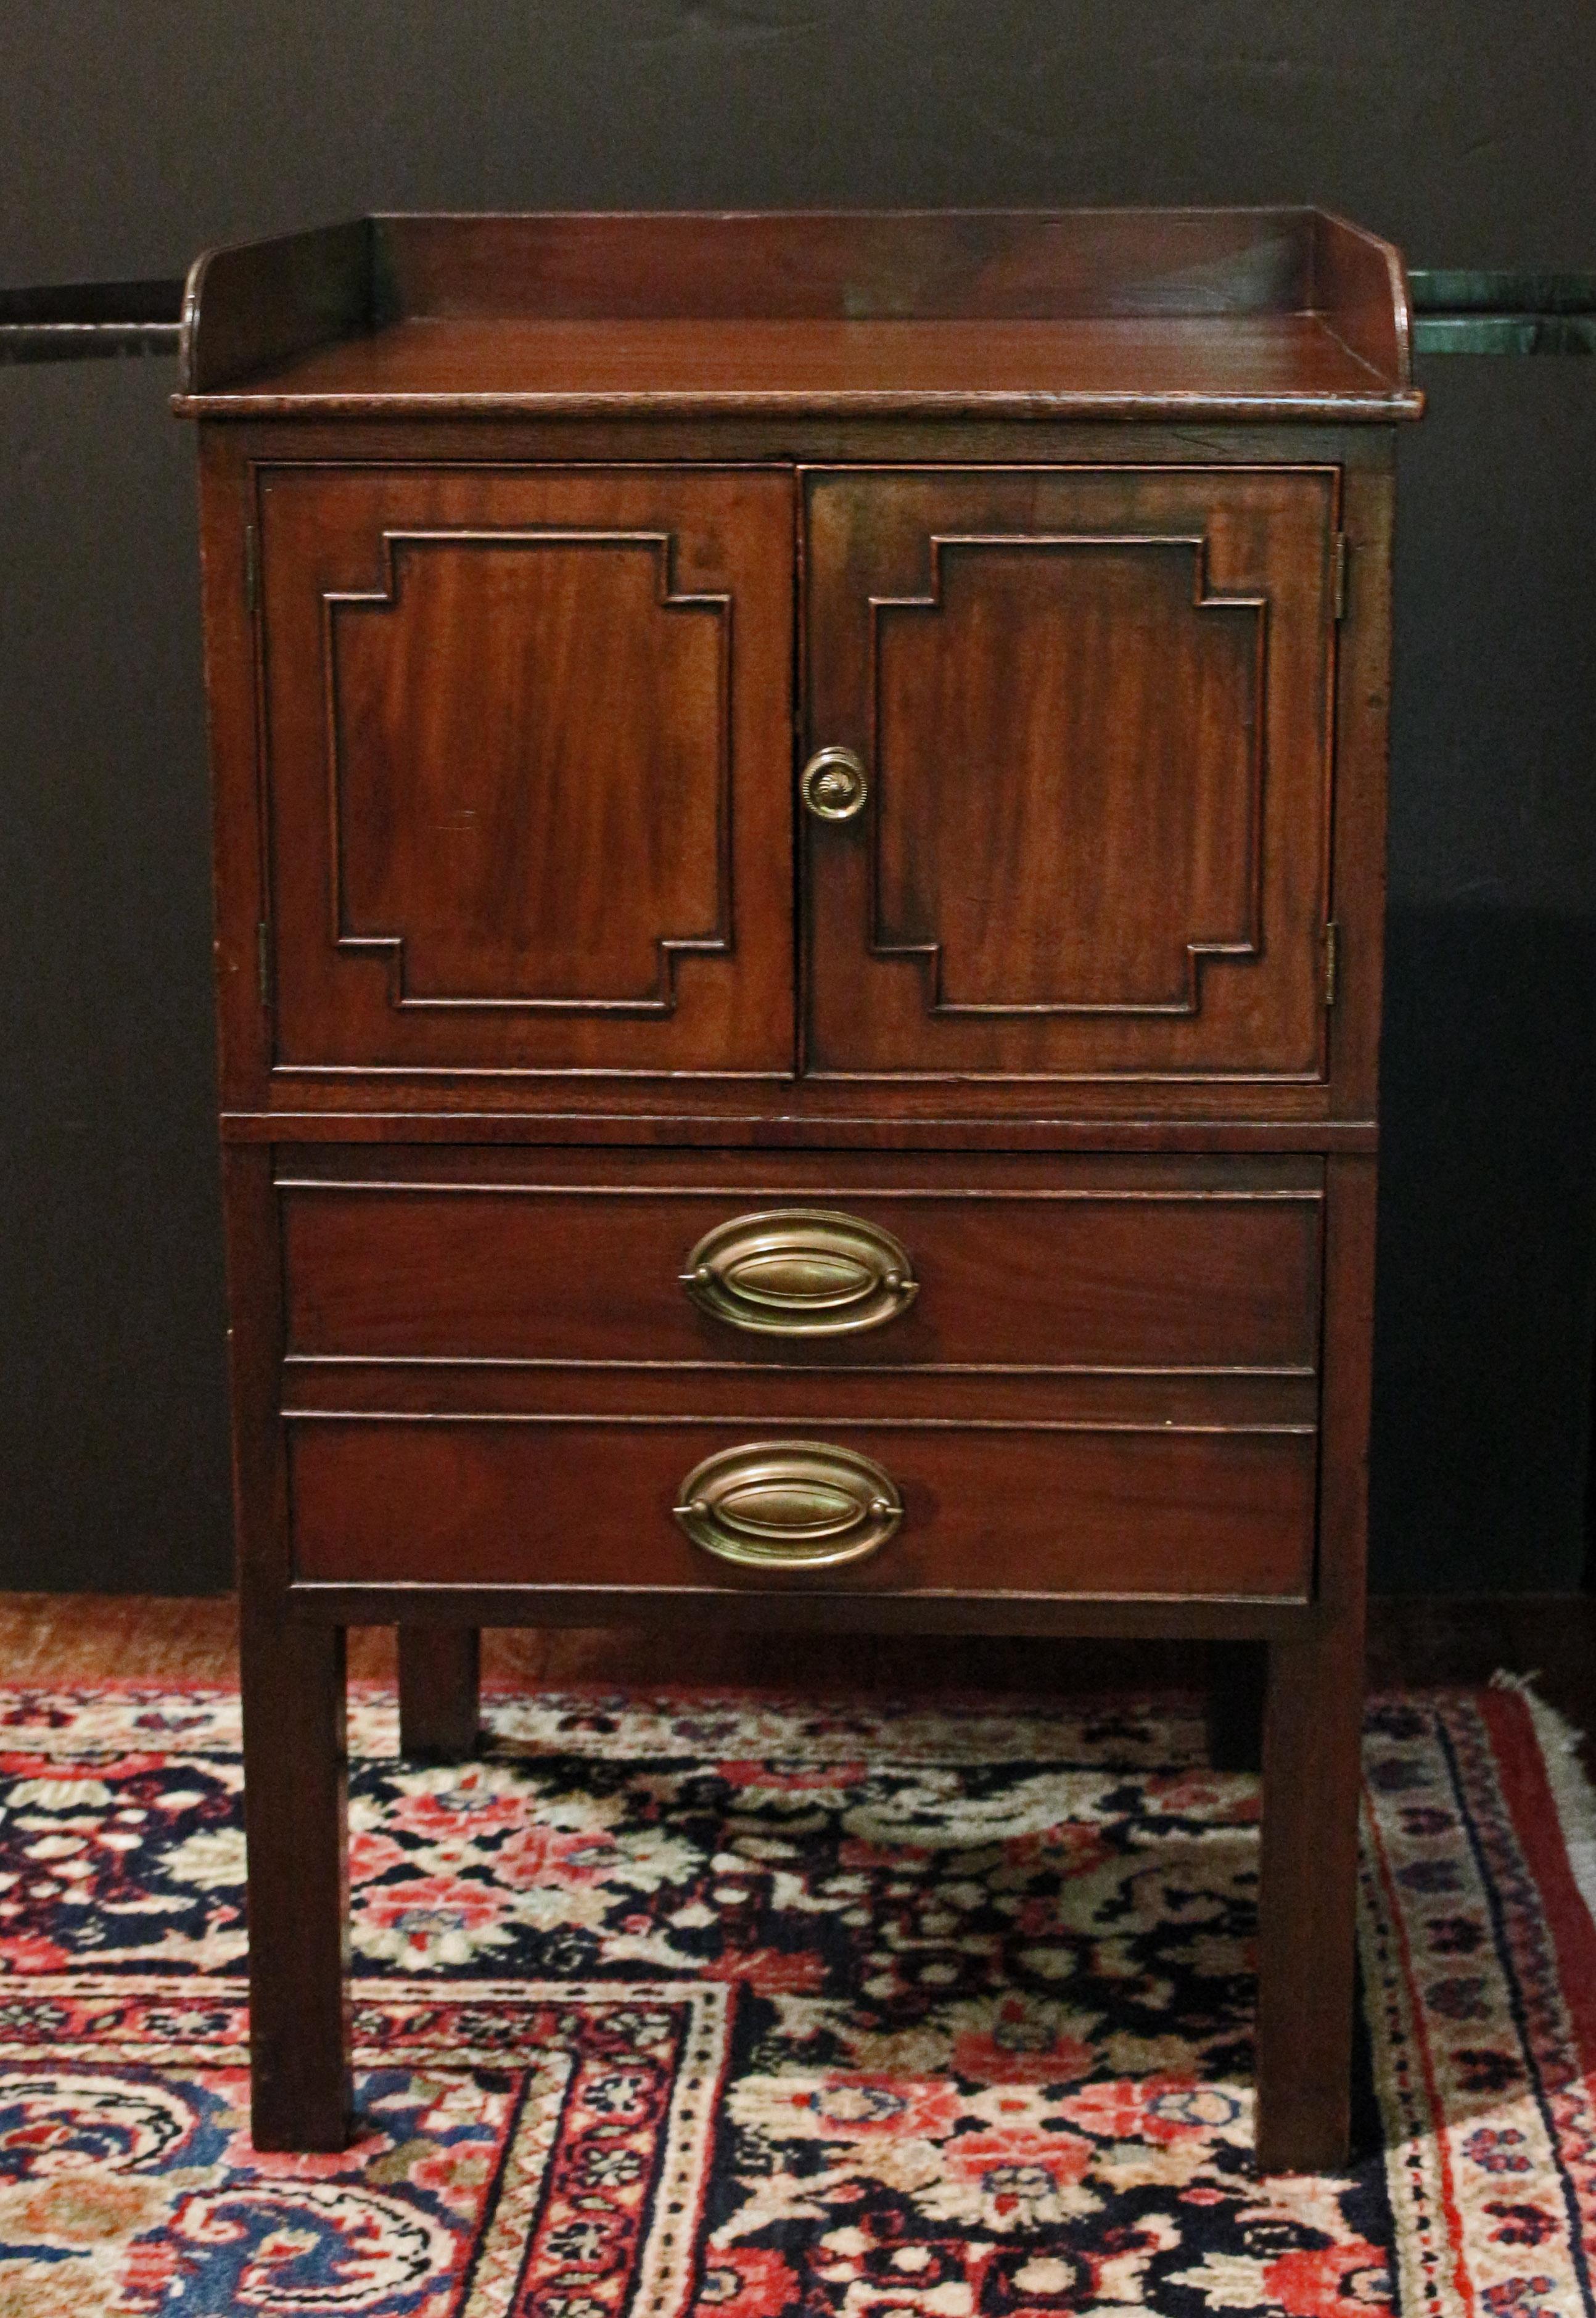 circa 1785 commode cabinet, George III, English. Mahogany & mahogany veneers. Gallery top. Converted from a bedside commode, now a cabinet over a deep drawer appearing as two drawers. Cut corner panelled doors. 32.5